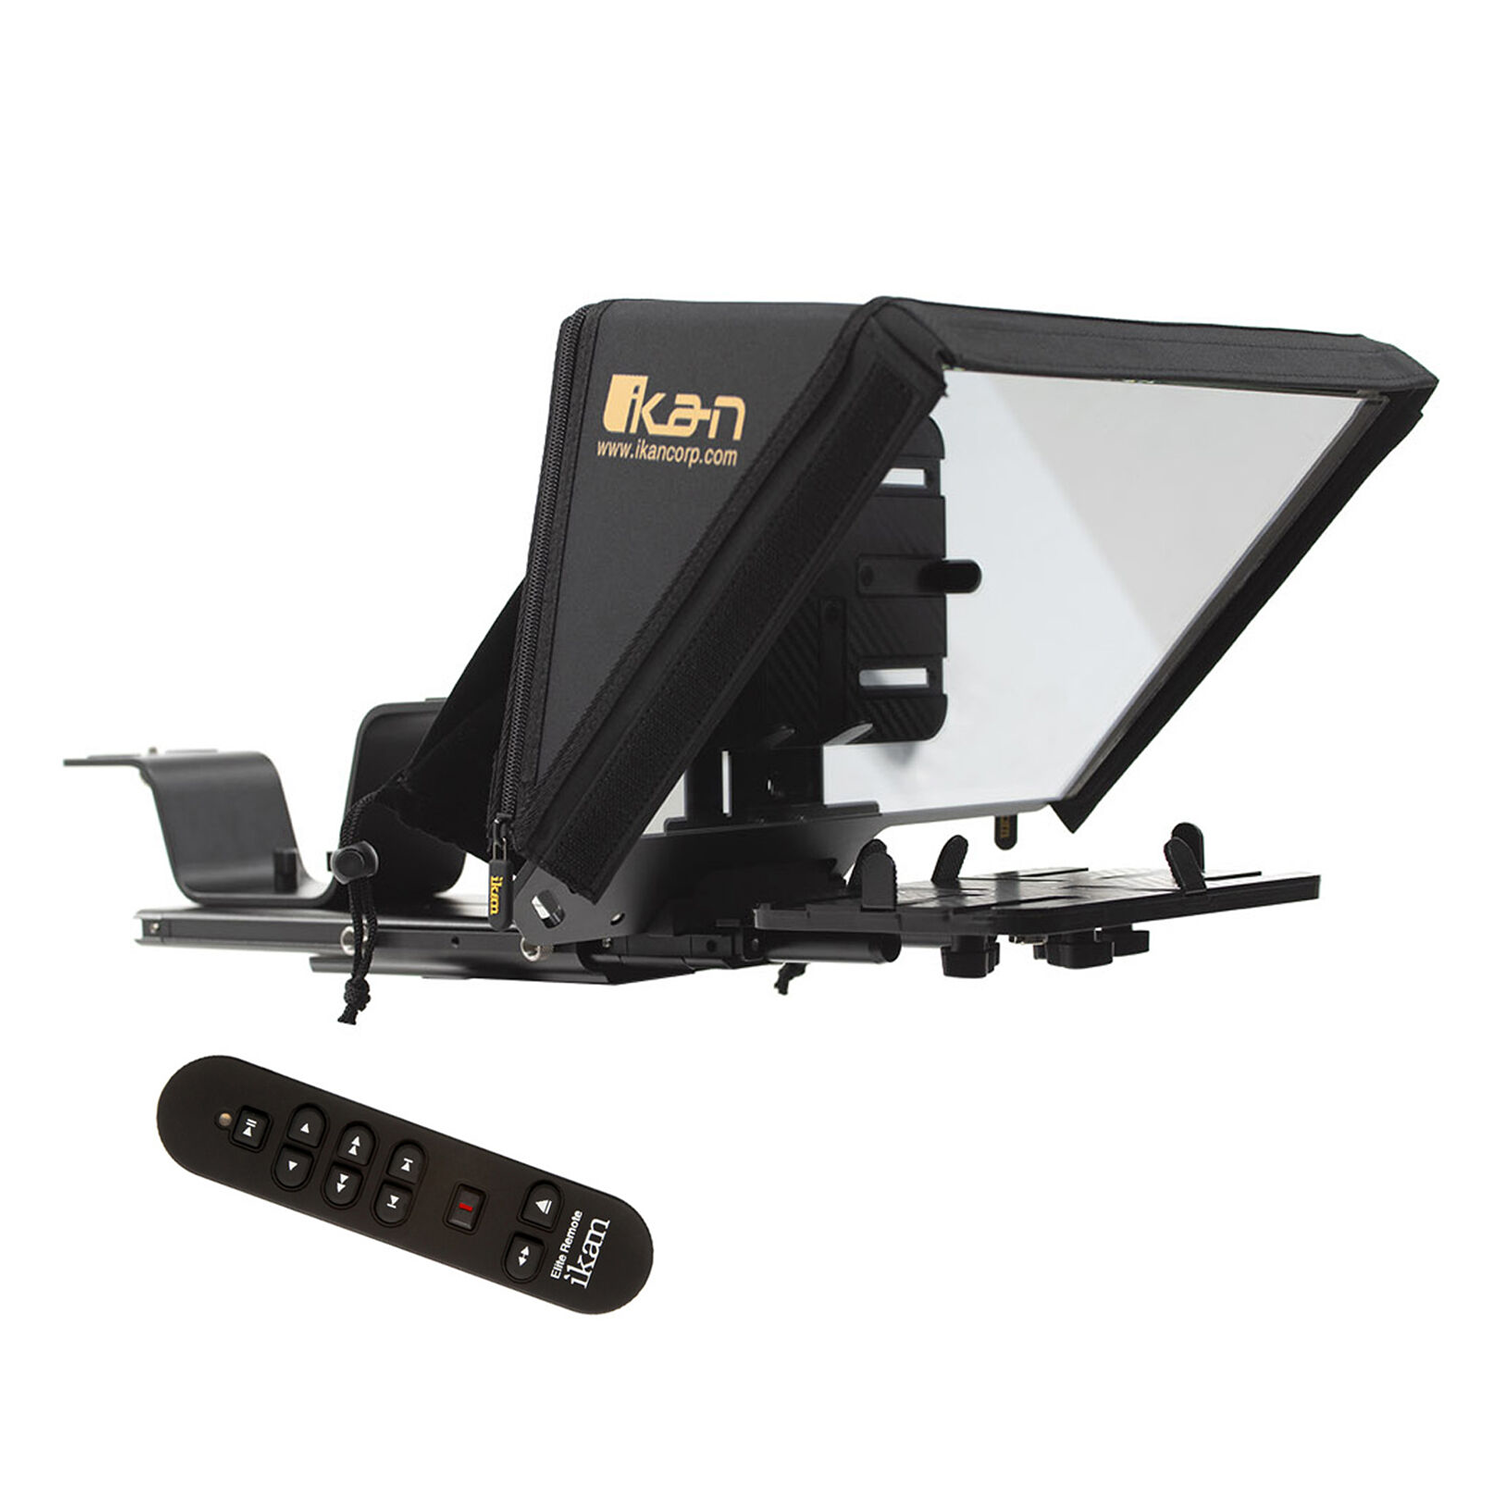 ikan Elite Universal Tablet Teleprompter for iPad and iPad Pro with Bluetooth Remote (Version 2)